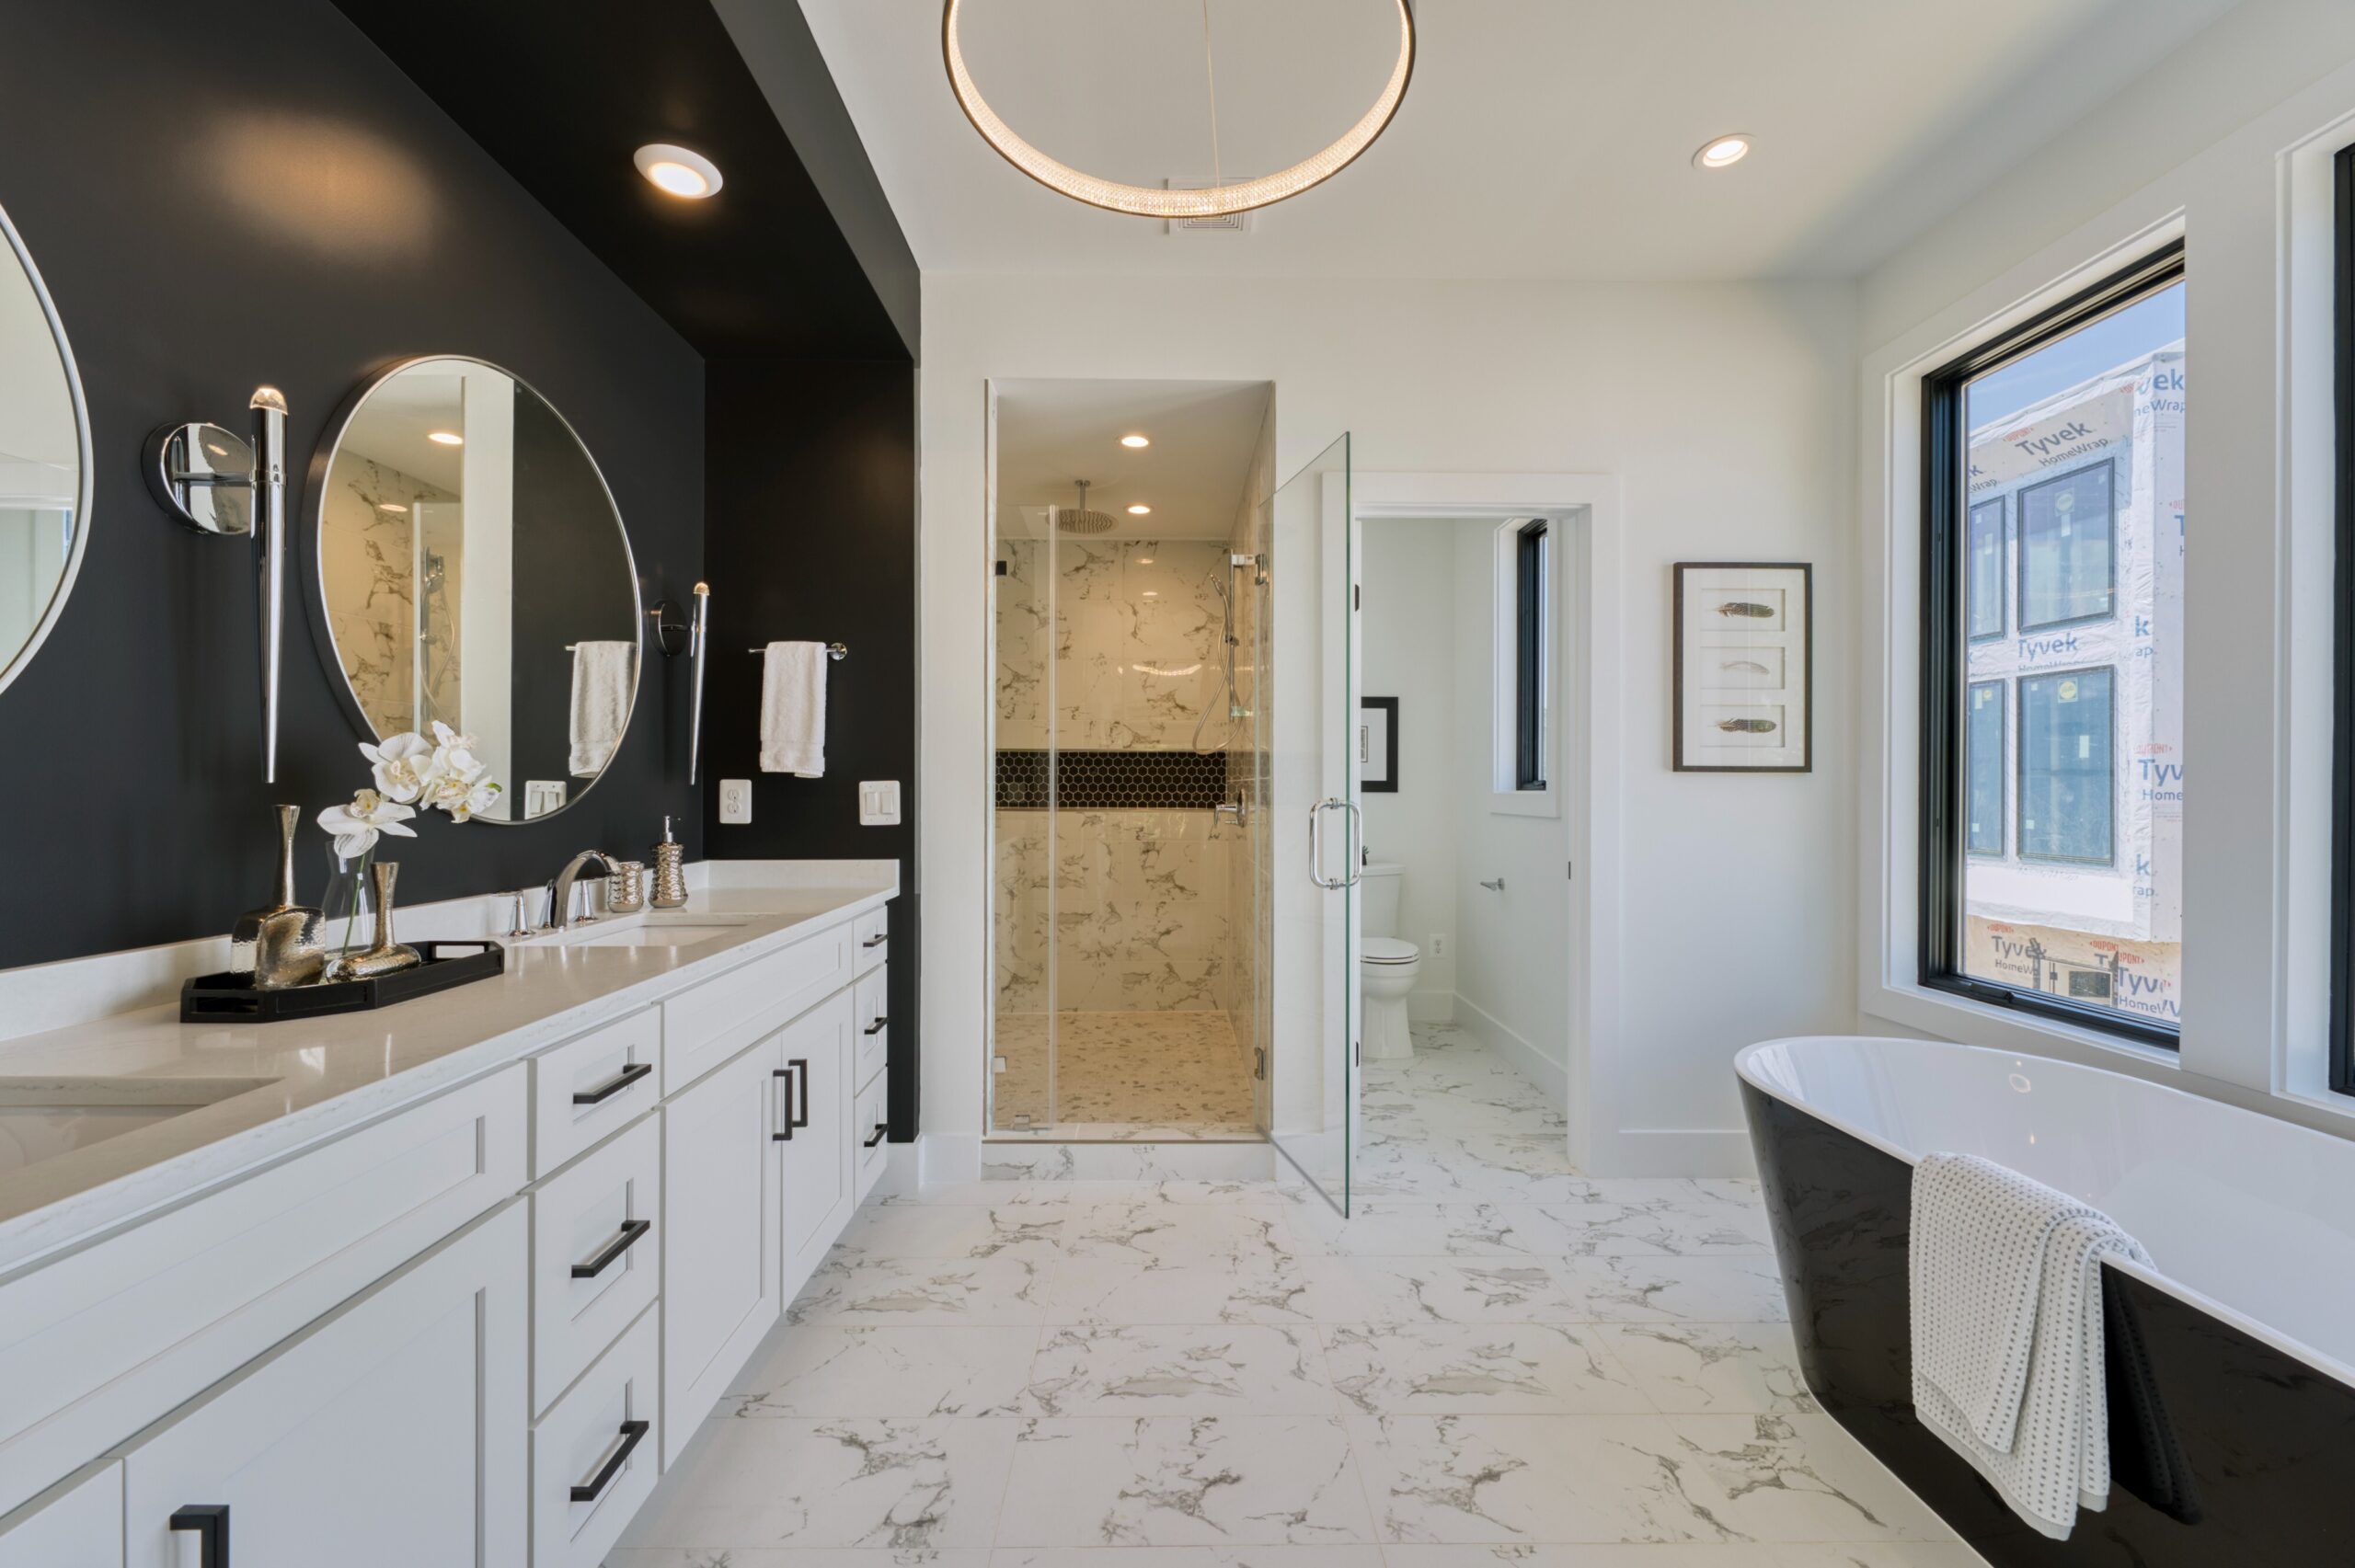 Professional interior photo of 1137 Buchanan St in McLean, VA - showing the primary bathroom finished in white quartz with soaking tub, commode room, and separate shower room